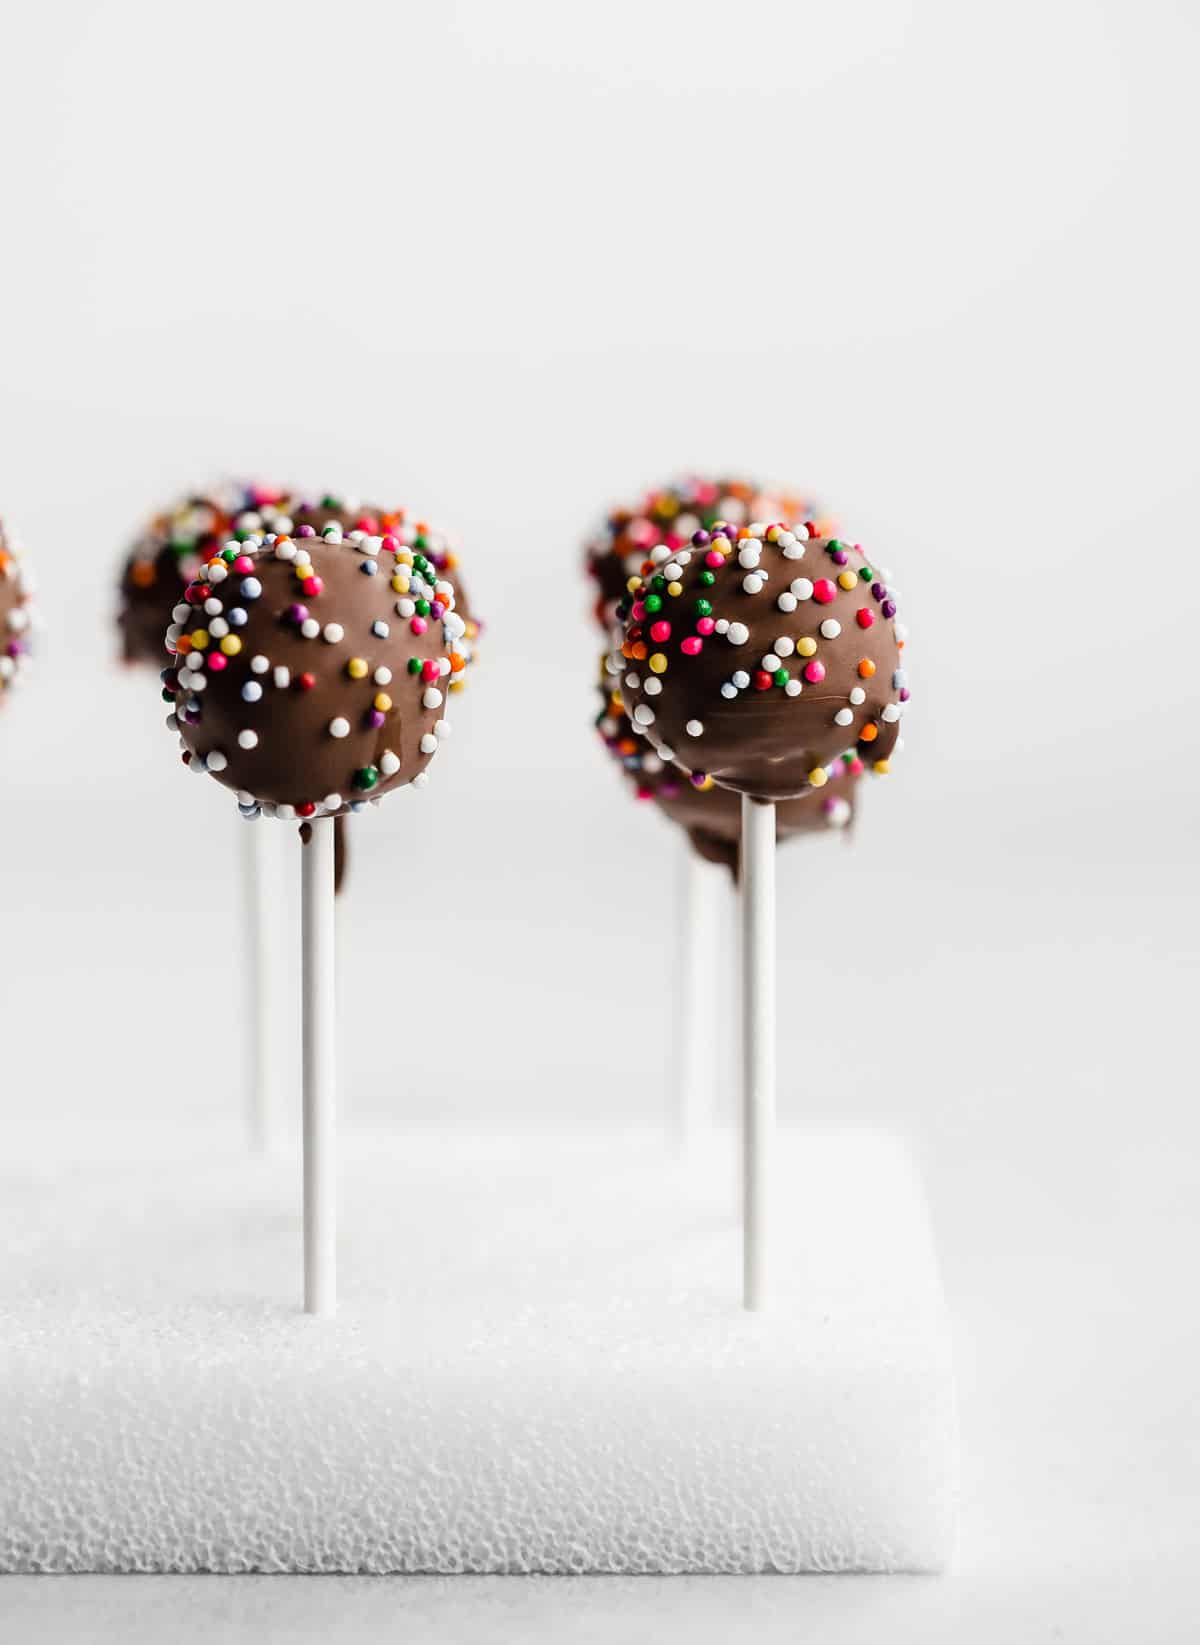 A chocolate covered chocolate cake pop topped with colorful sprinkles, standing in a white styrofoam cube against a white background.